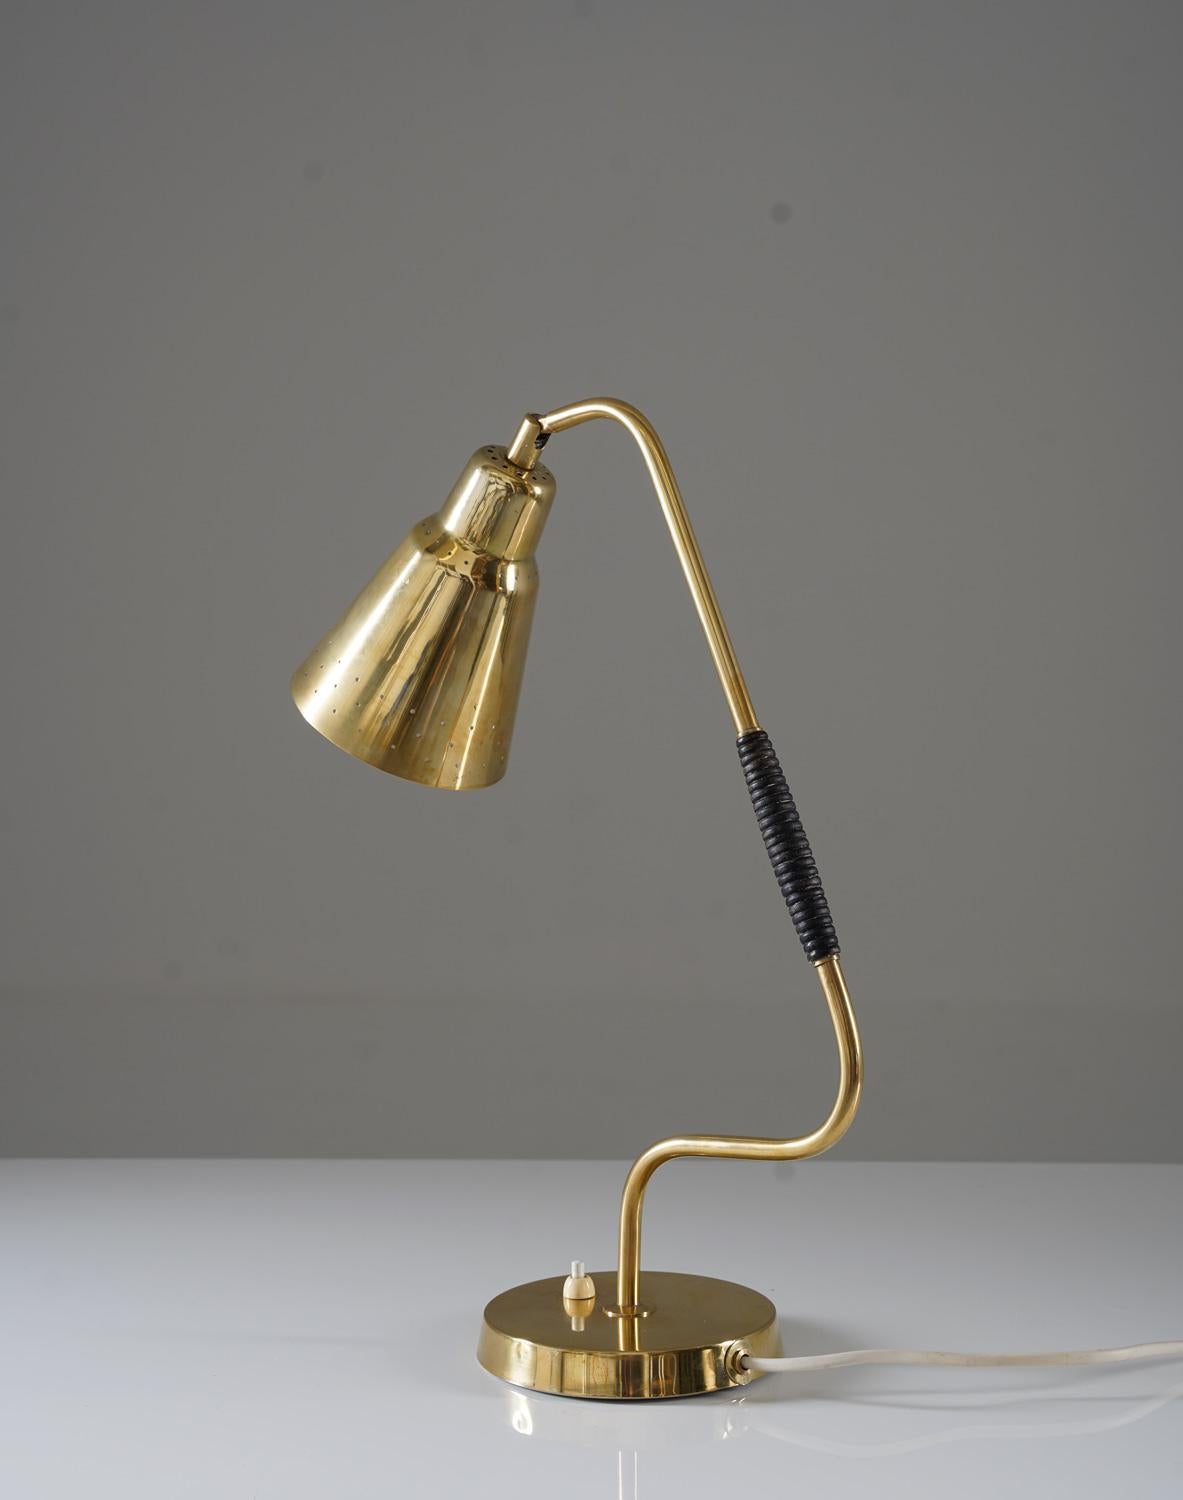 Introducing a rare and early table lamp by Bergboms. This stunning lamp is made of solid brass, with a perforated shade and a wooden handle on the rod. It uses an E-14 bulb, with a maximum wattage of 25W.

Bergboms was a Swedish manufacturer of